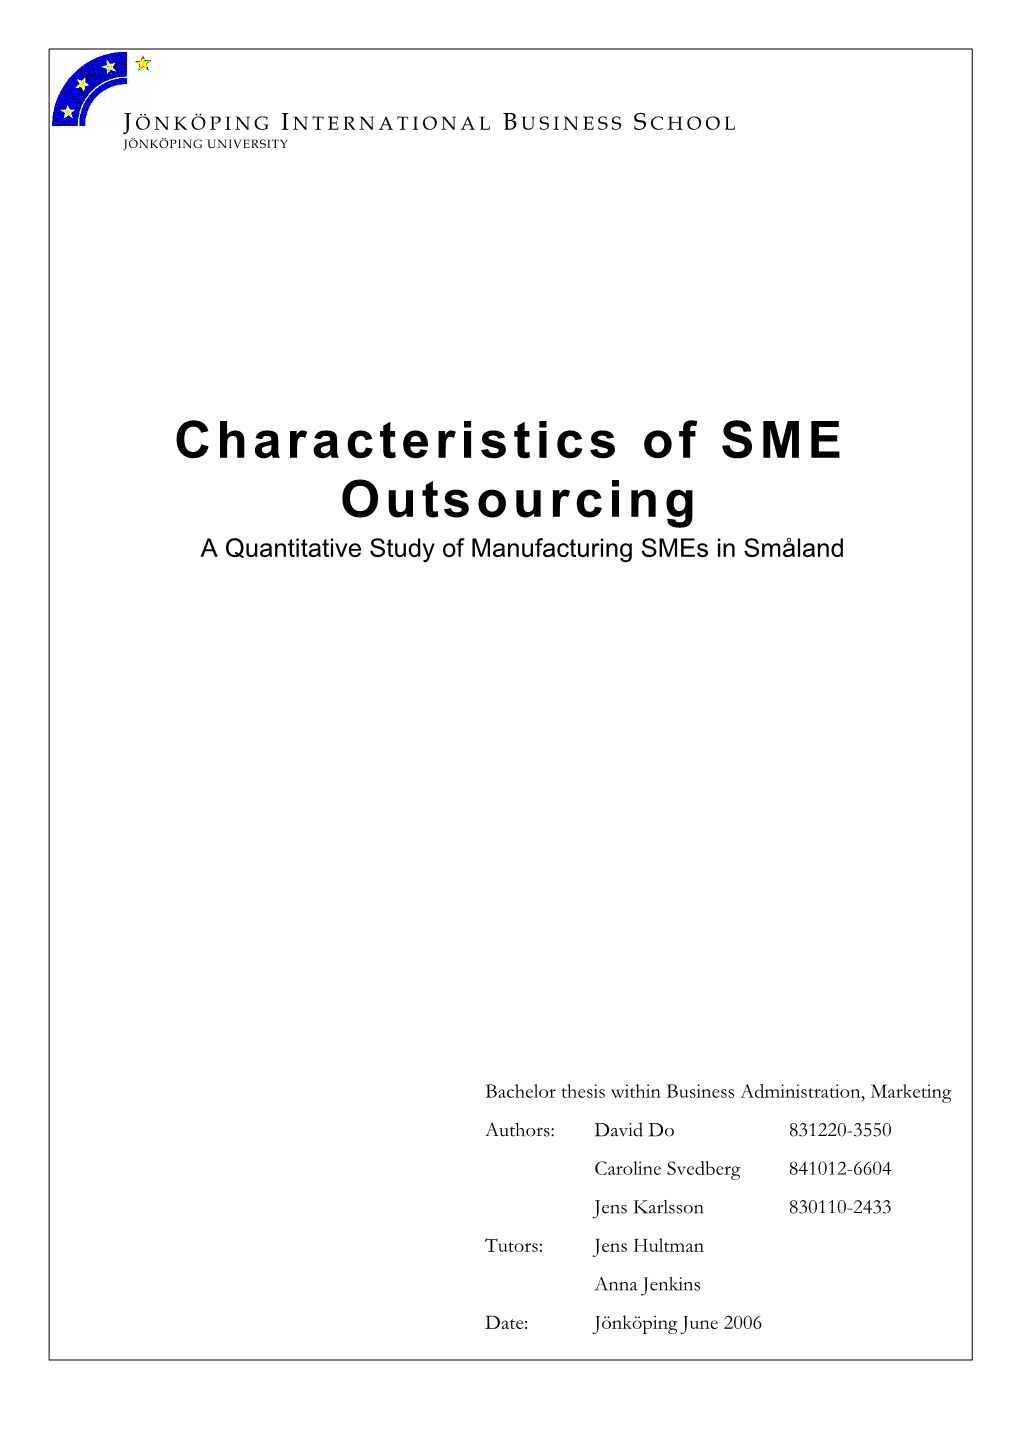 Outsourcing Smes in Småland